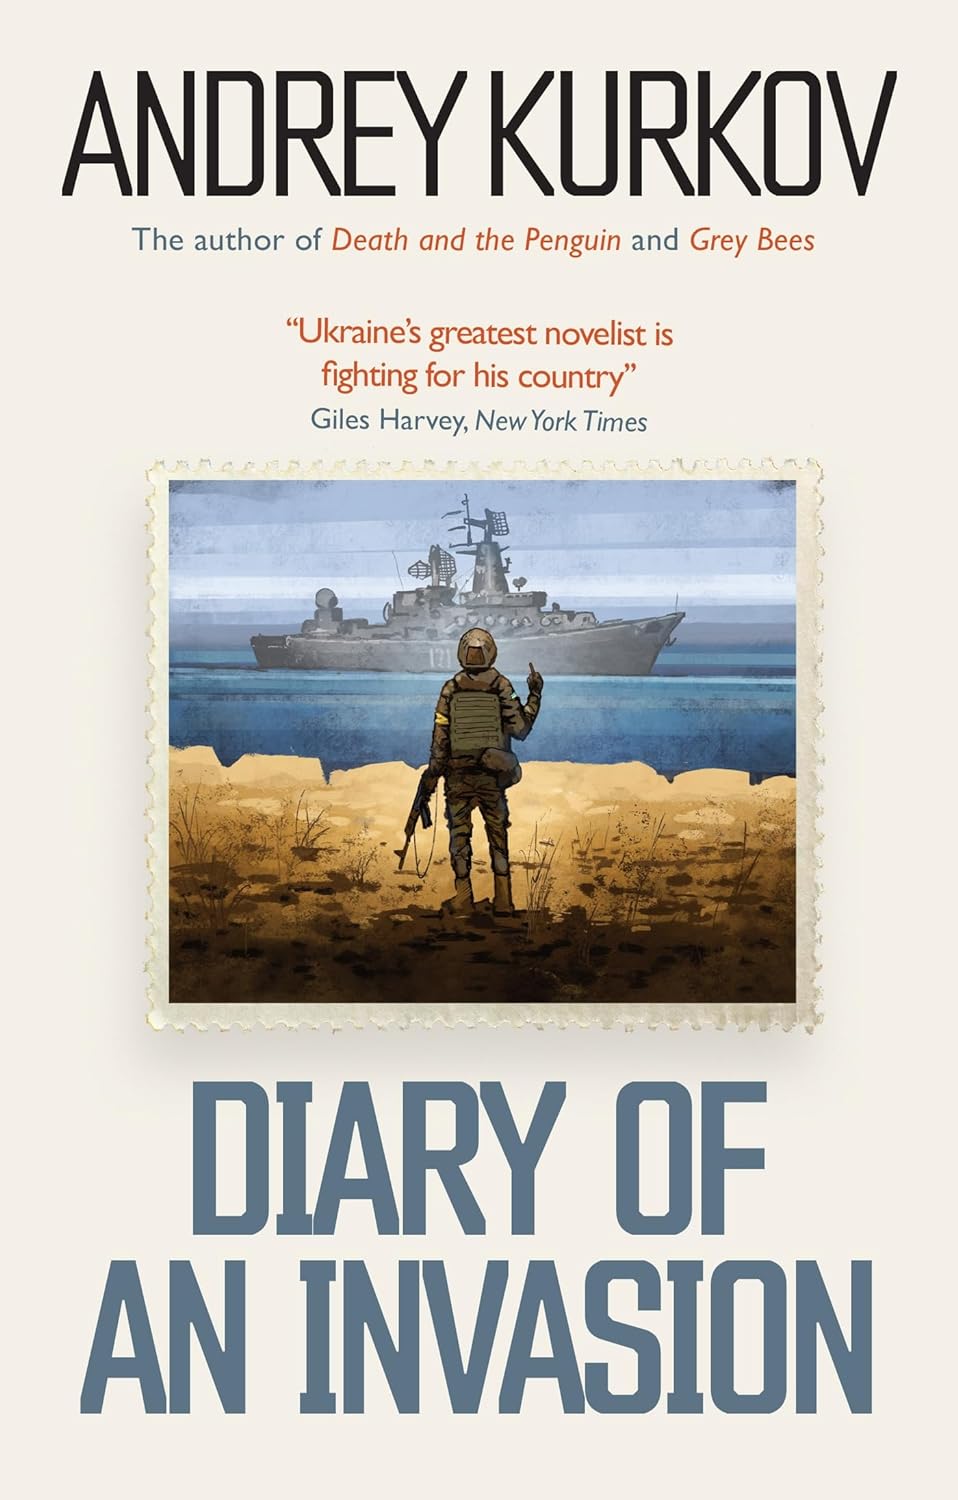 Diary of an Invasion: The Russian Invasion of Ukraine